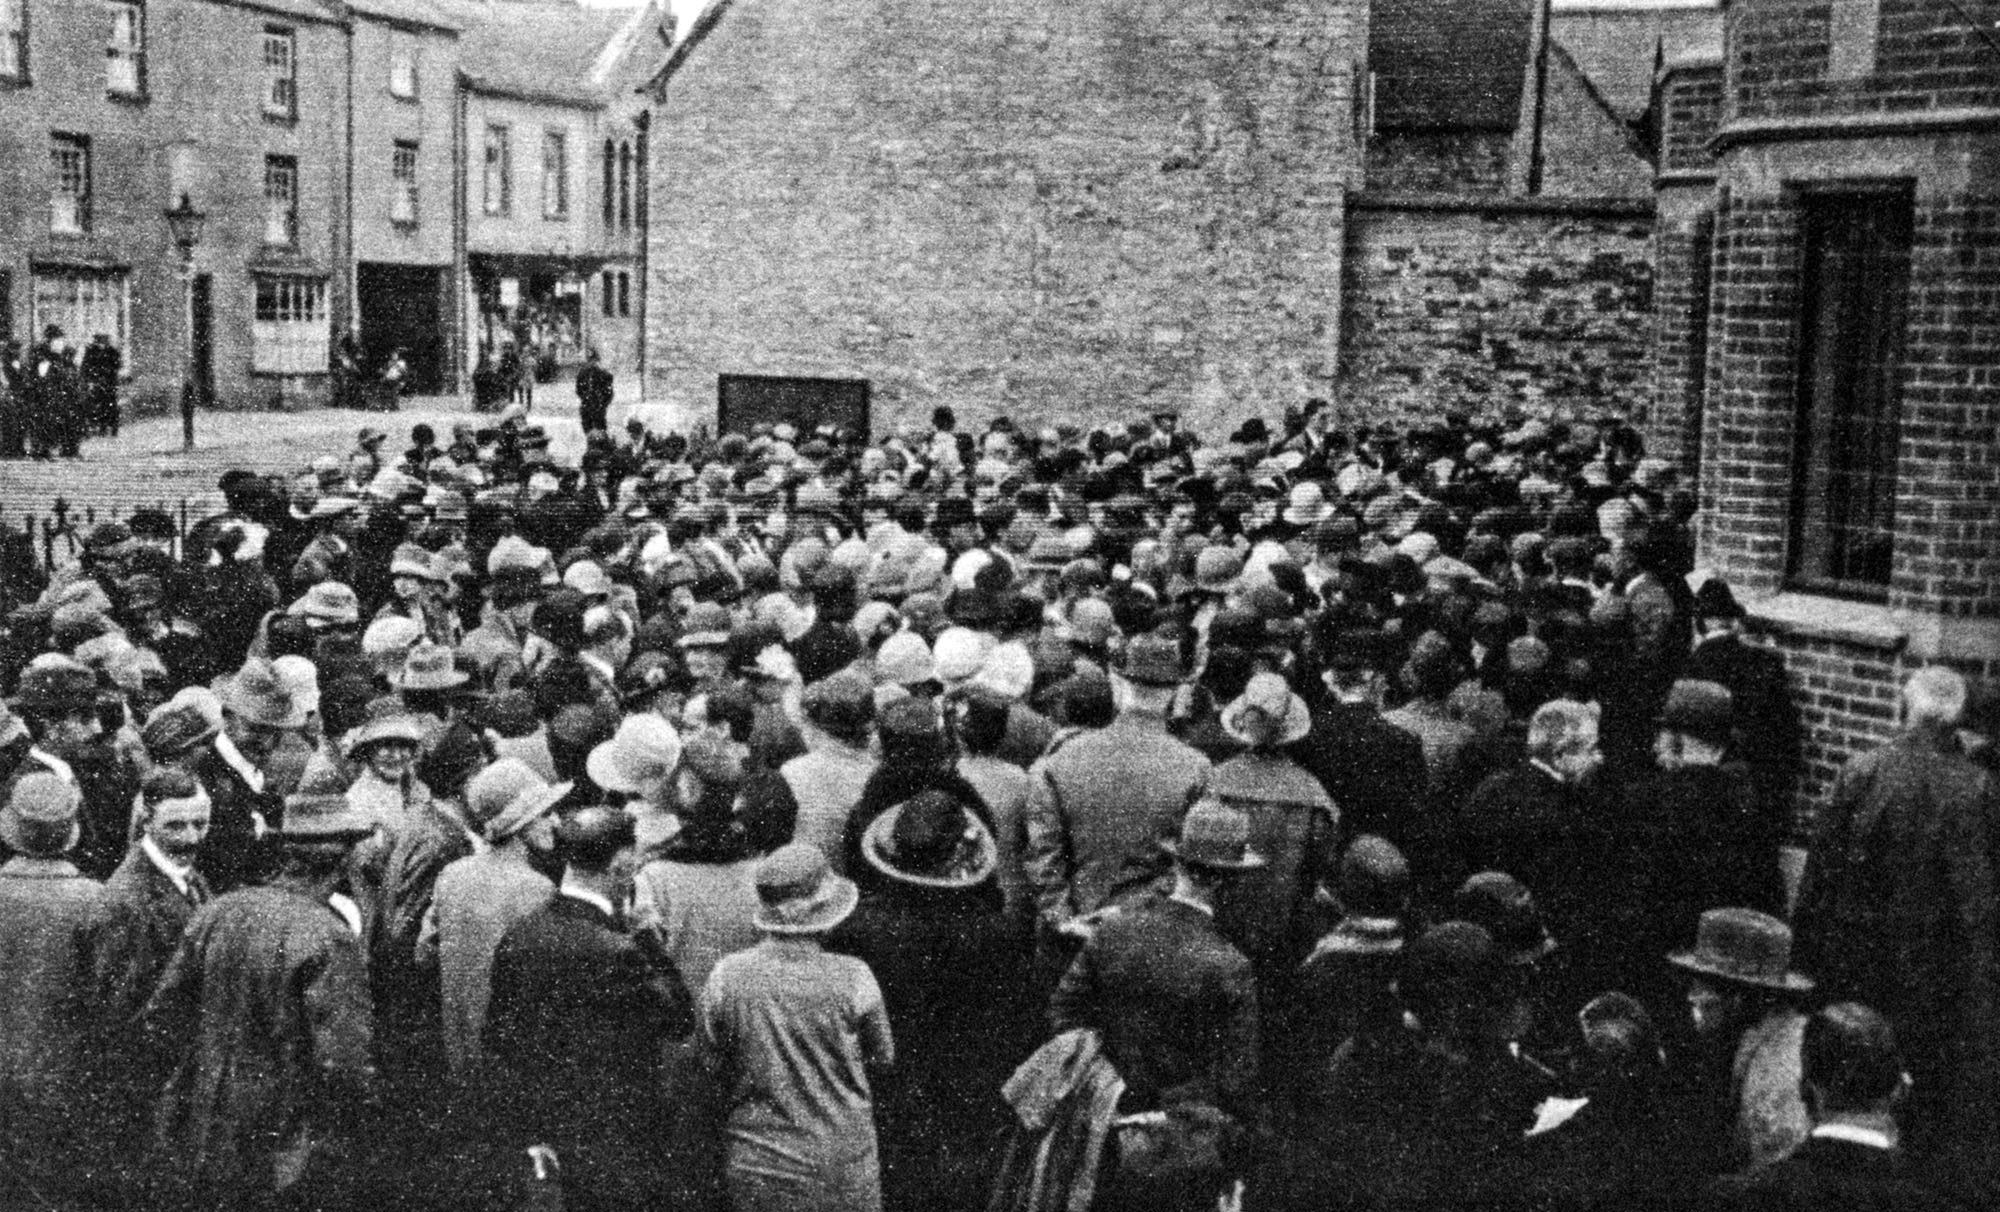 Opening of the new church, 23rd June 1927.